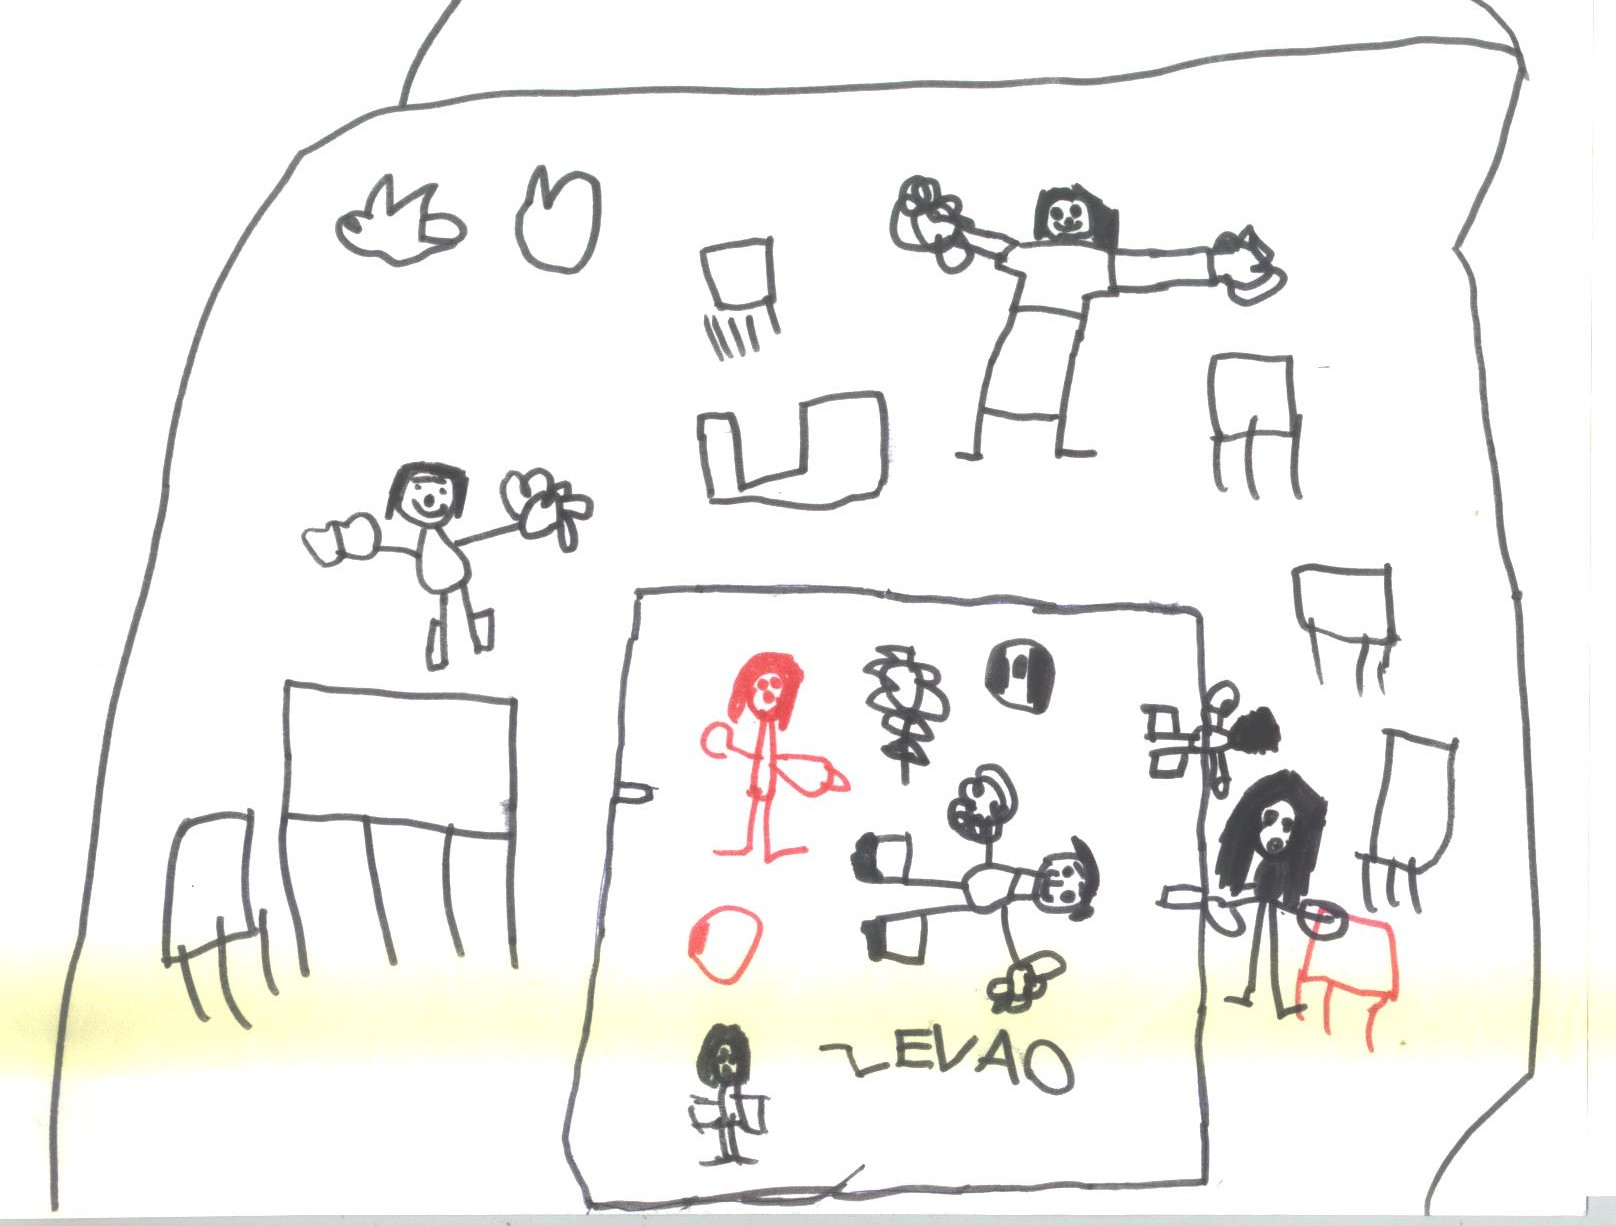 Drawing by five-year old Eva, representing the house she lives in